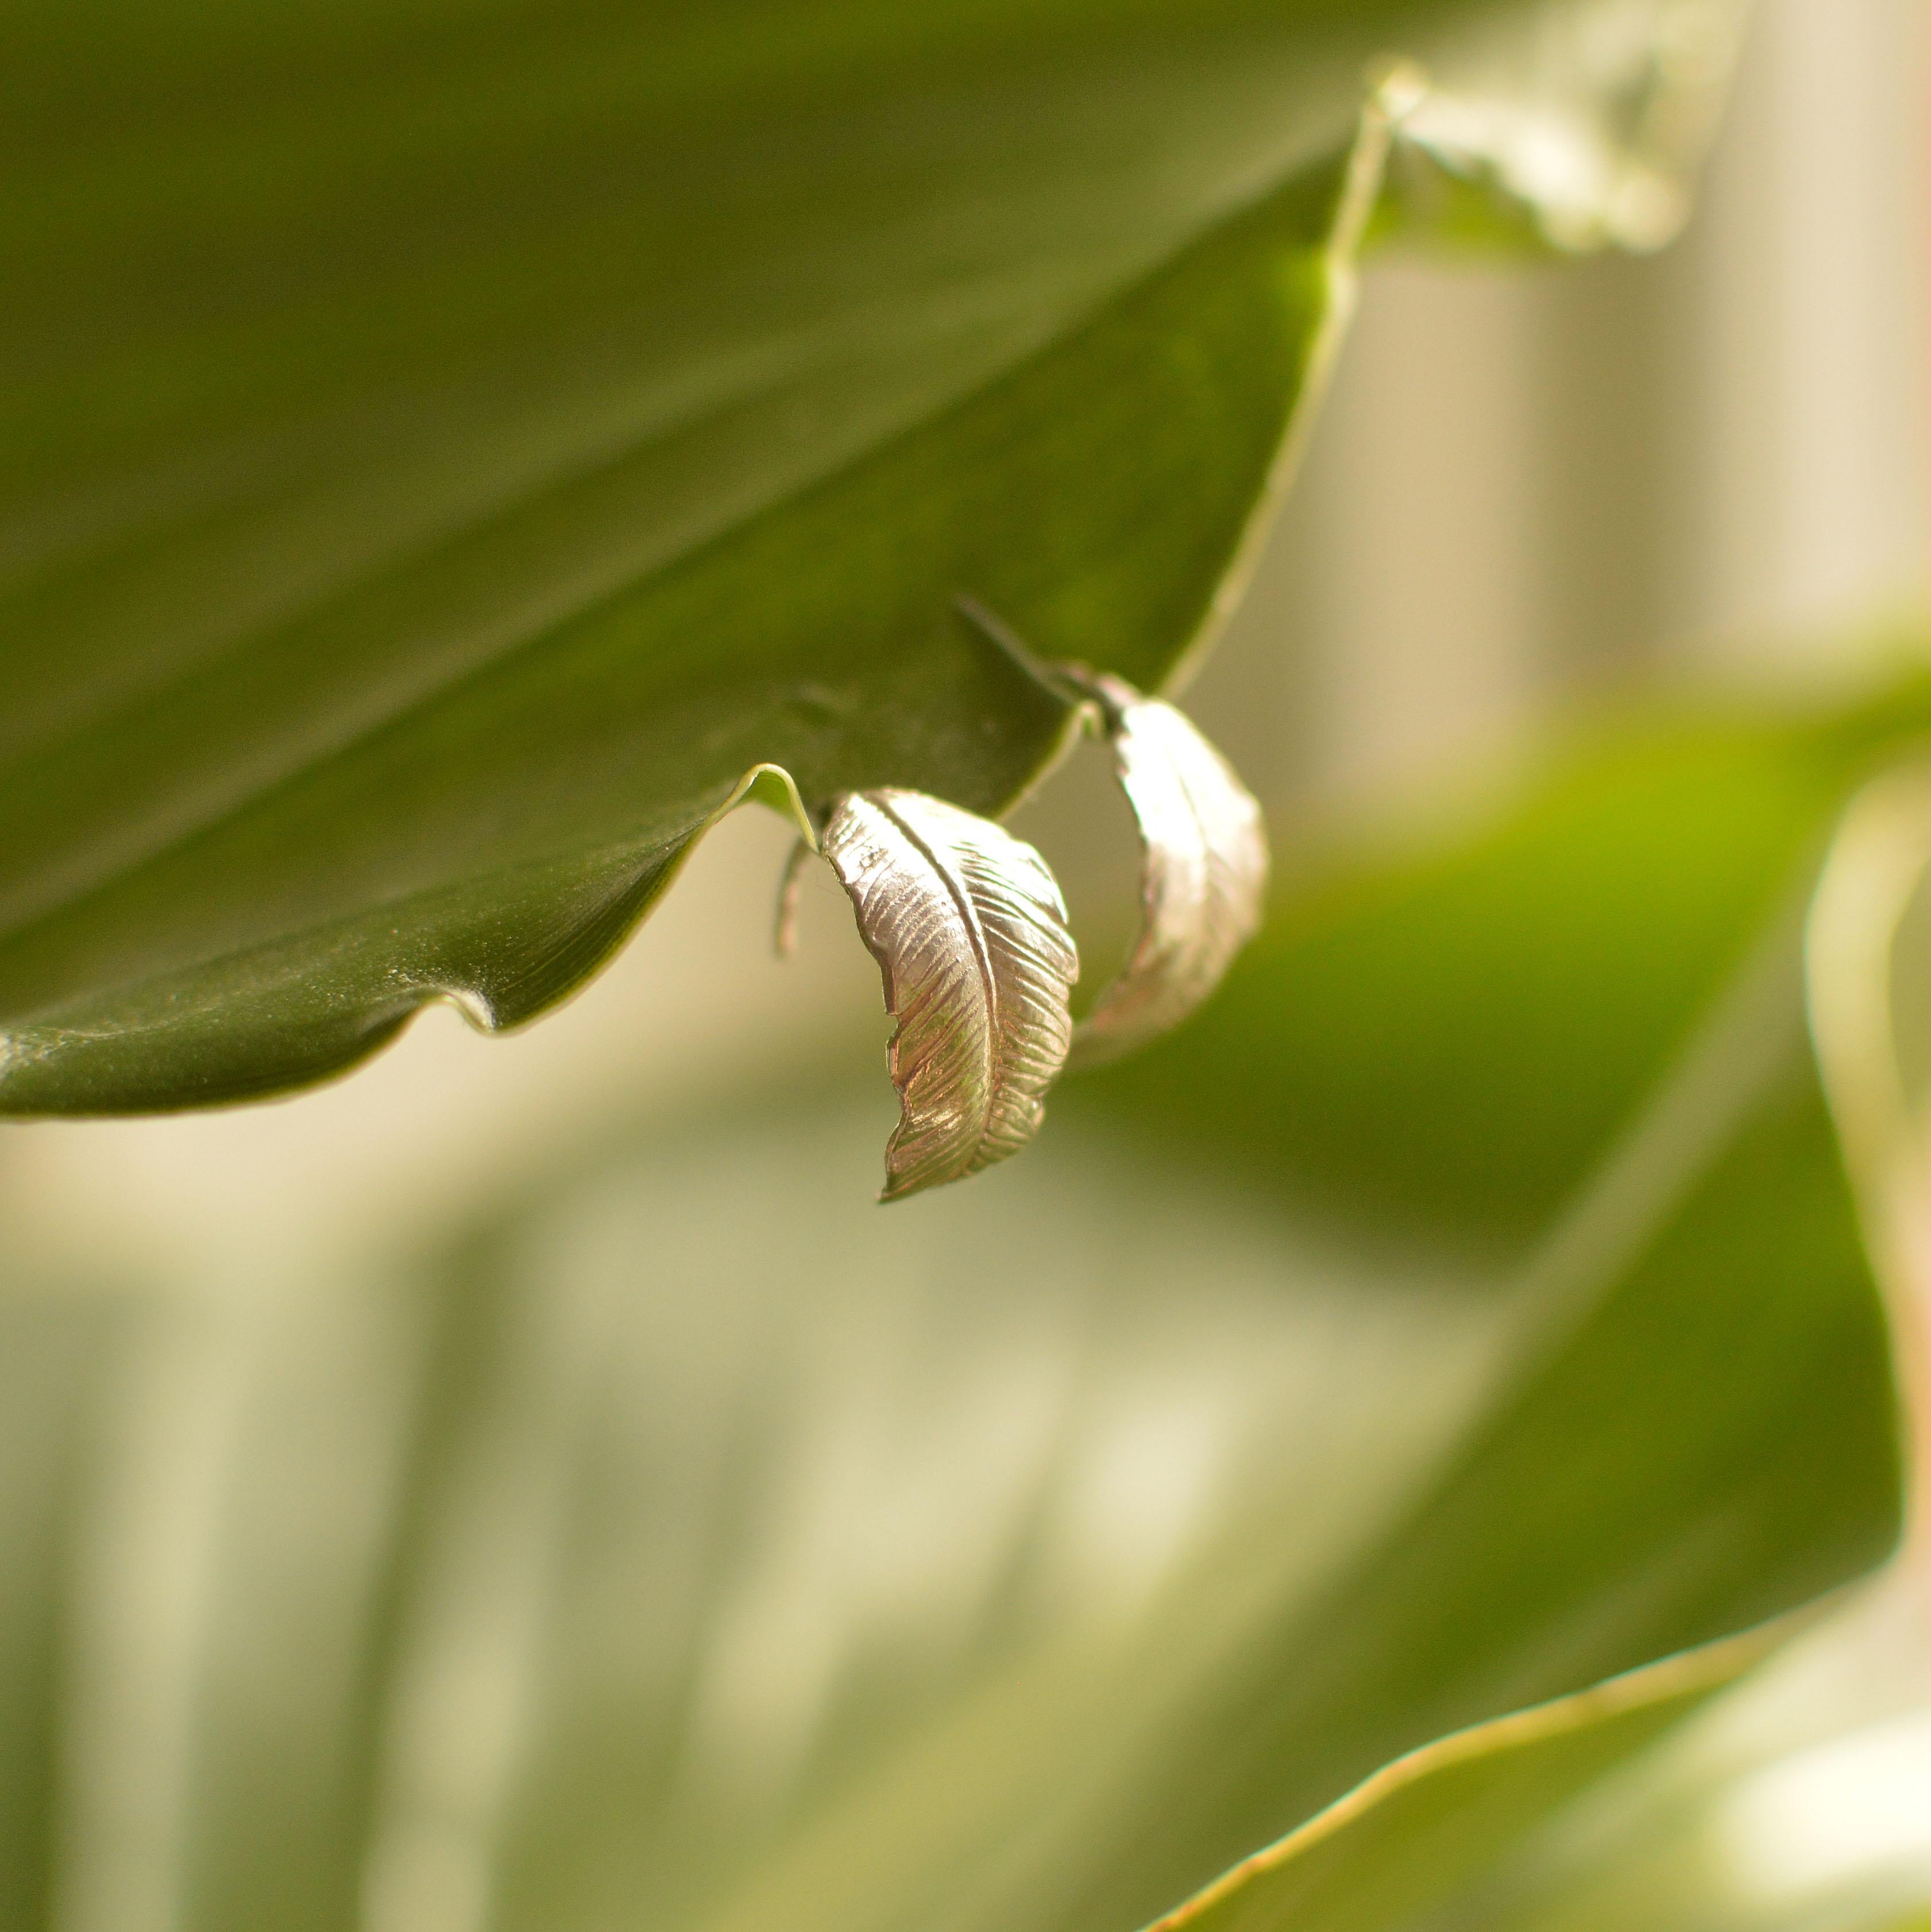 These curling banana leaves form a half-hoop shaped earring are cast in solid 18 Carat gold and finished by hand, and created from Lucy's original hand-sculpted design. 

These butterfly earrings are made in London, United Kingdom using recycled or